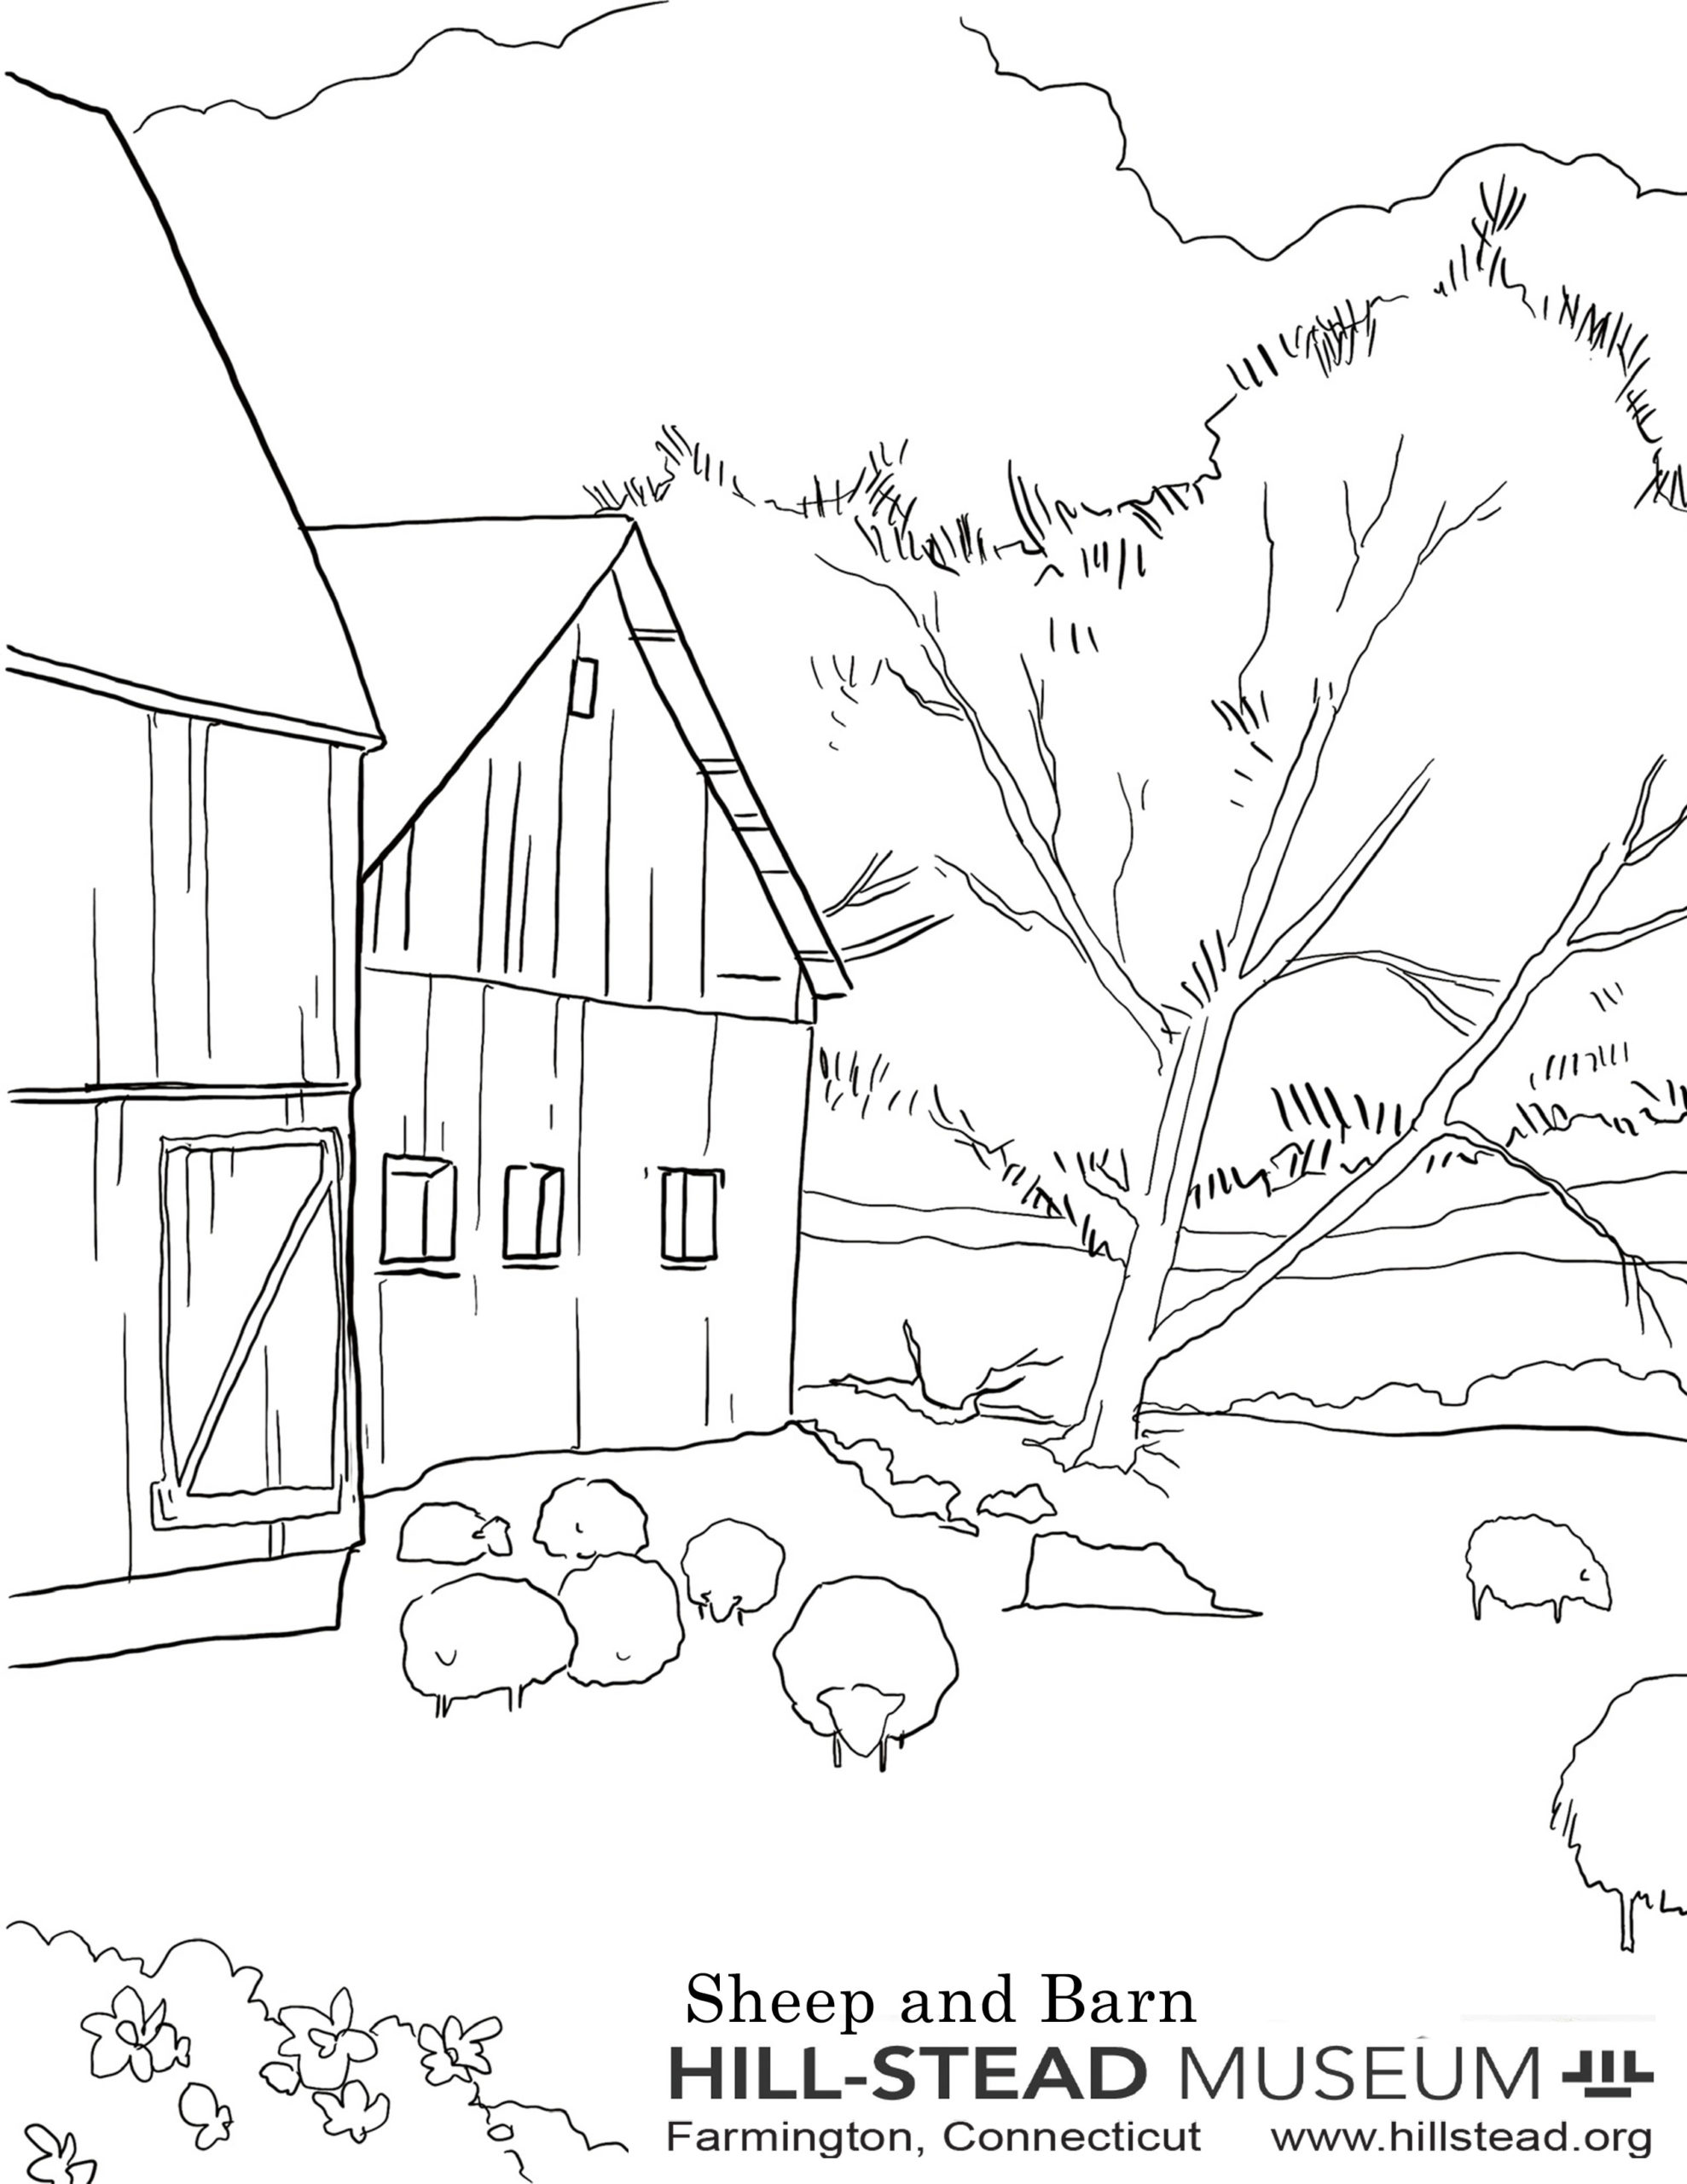 Hill-Stead Coloring Pages | Hill-Stead Museum